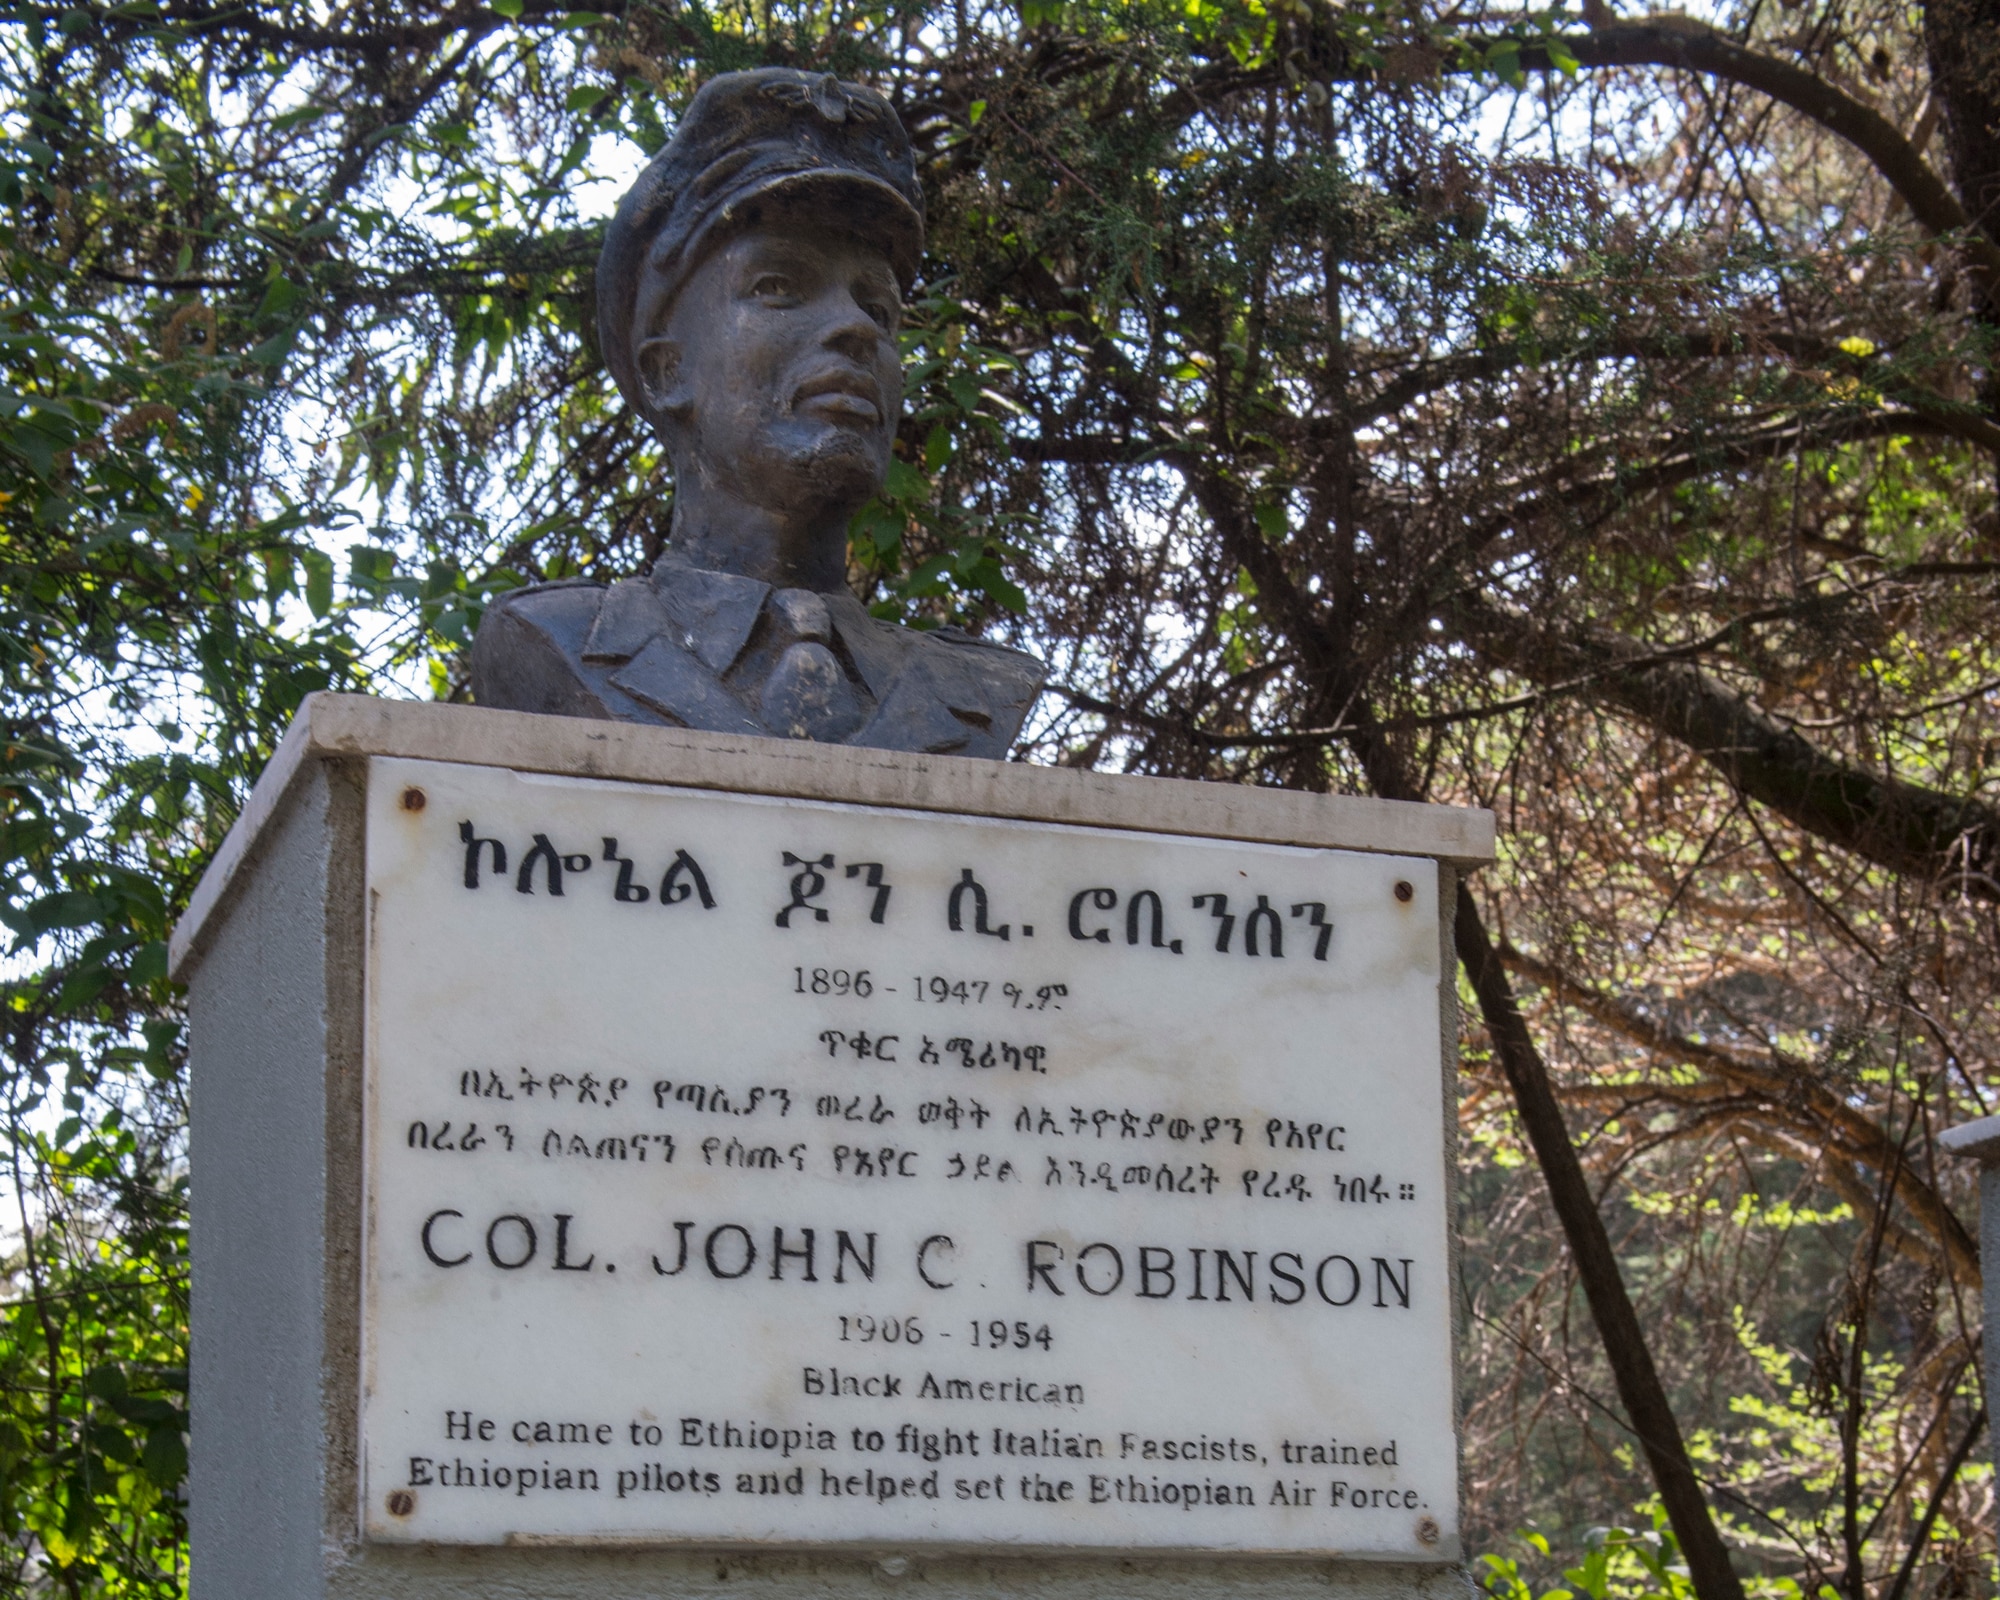 A bust of the American-born Ethiopian air force  Col. John Robinson overlooks the Addis Ababa War Cemetery in Ethiopia Jan. 11, 2020. Robinson is considered a national hero of Ethiopia who pioneered flight schools in the U.S. and Ethiopia. (U.S. Air Force photo by Staff Sgt. Sarah Brice)